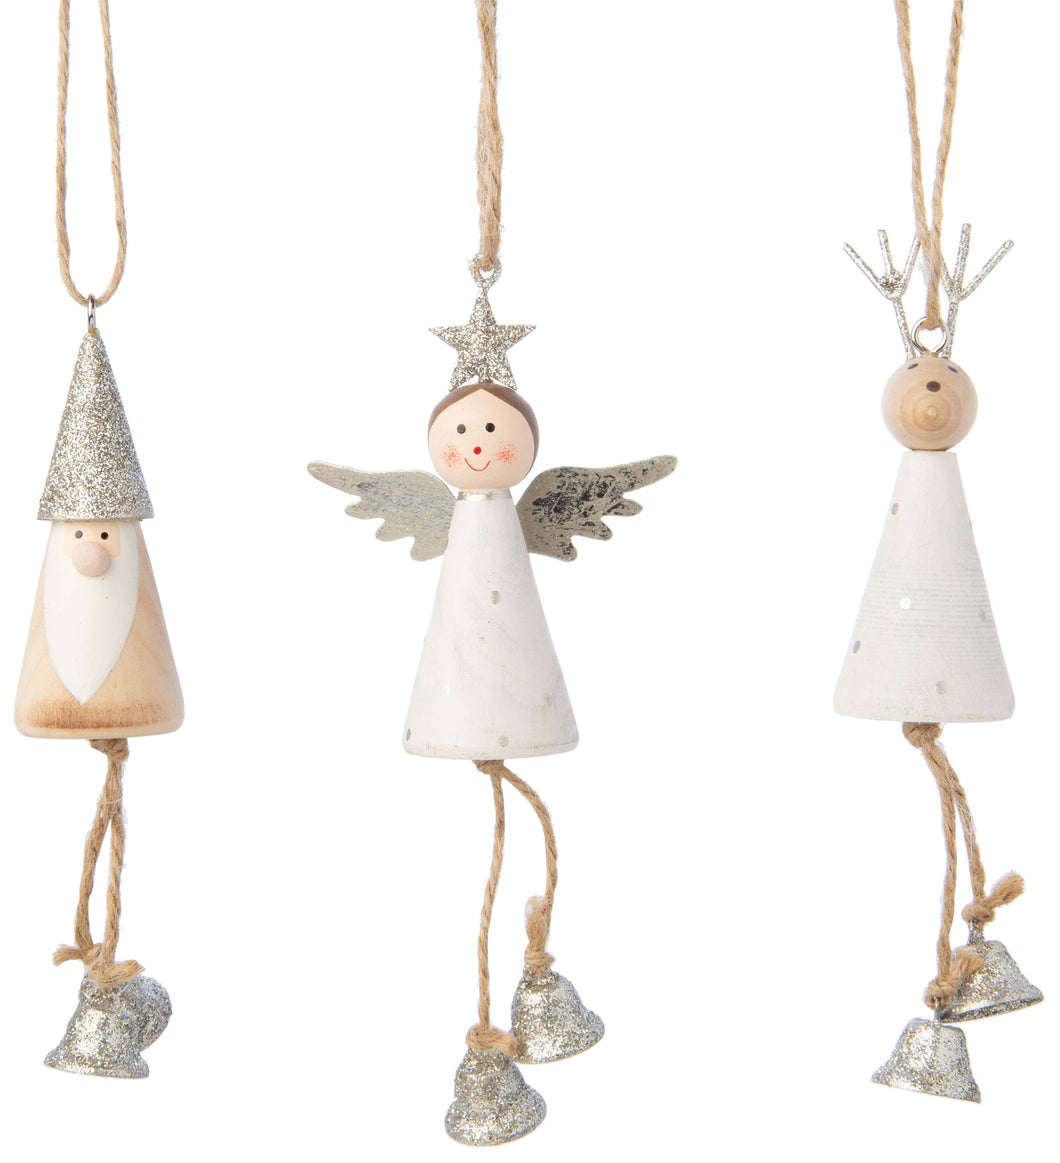 Silver Tree Home & Holiday - A41400 3 Asst'd painted wood body mini angel Santa&reindeer